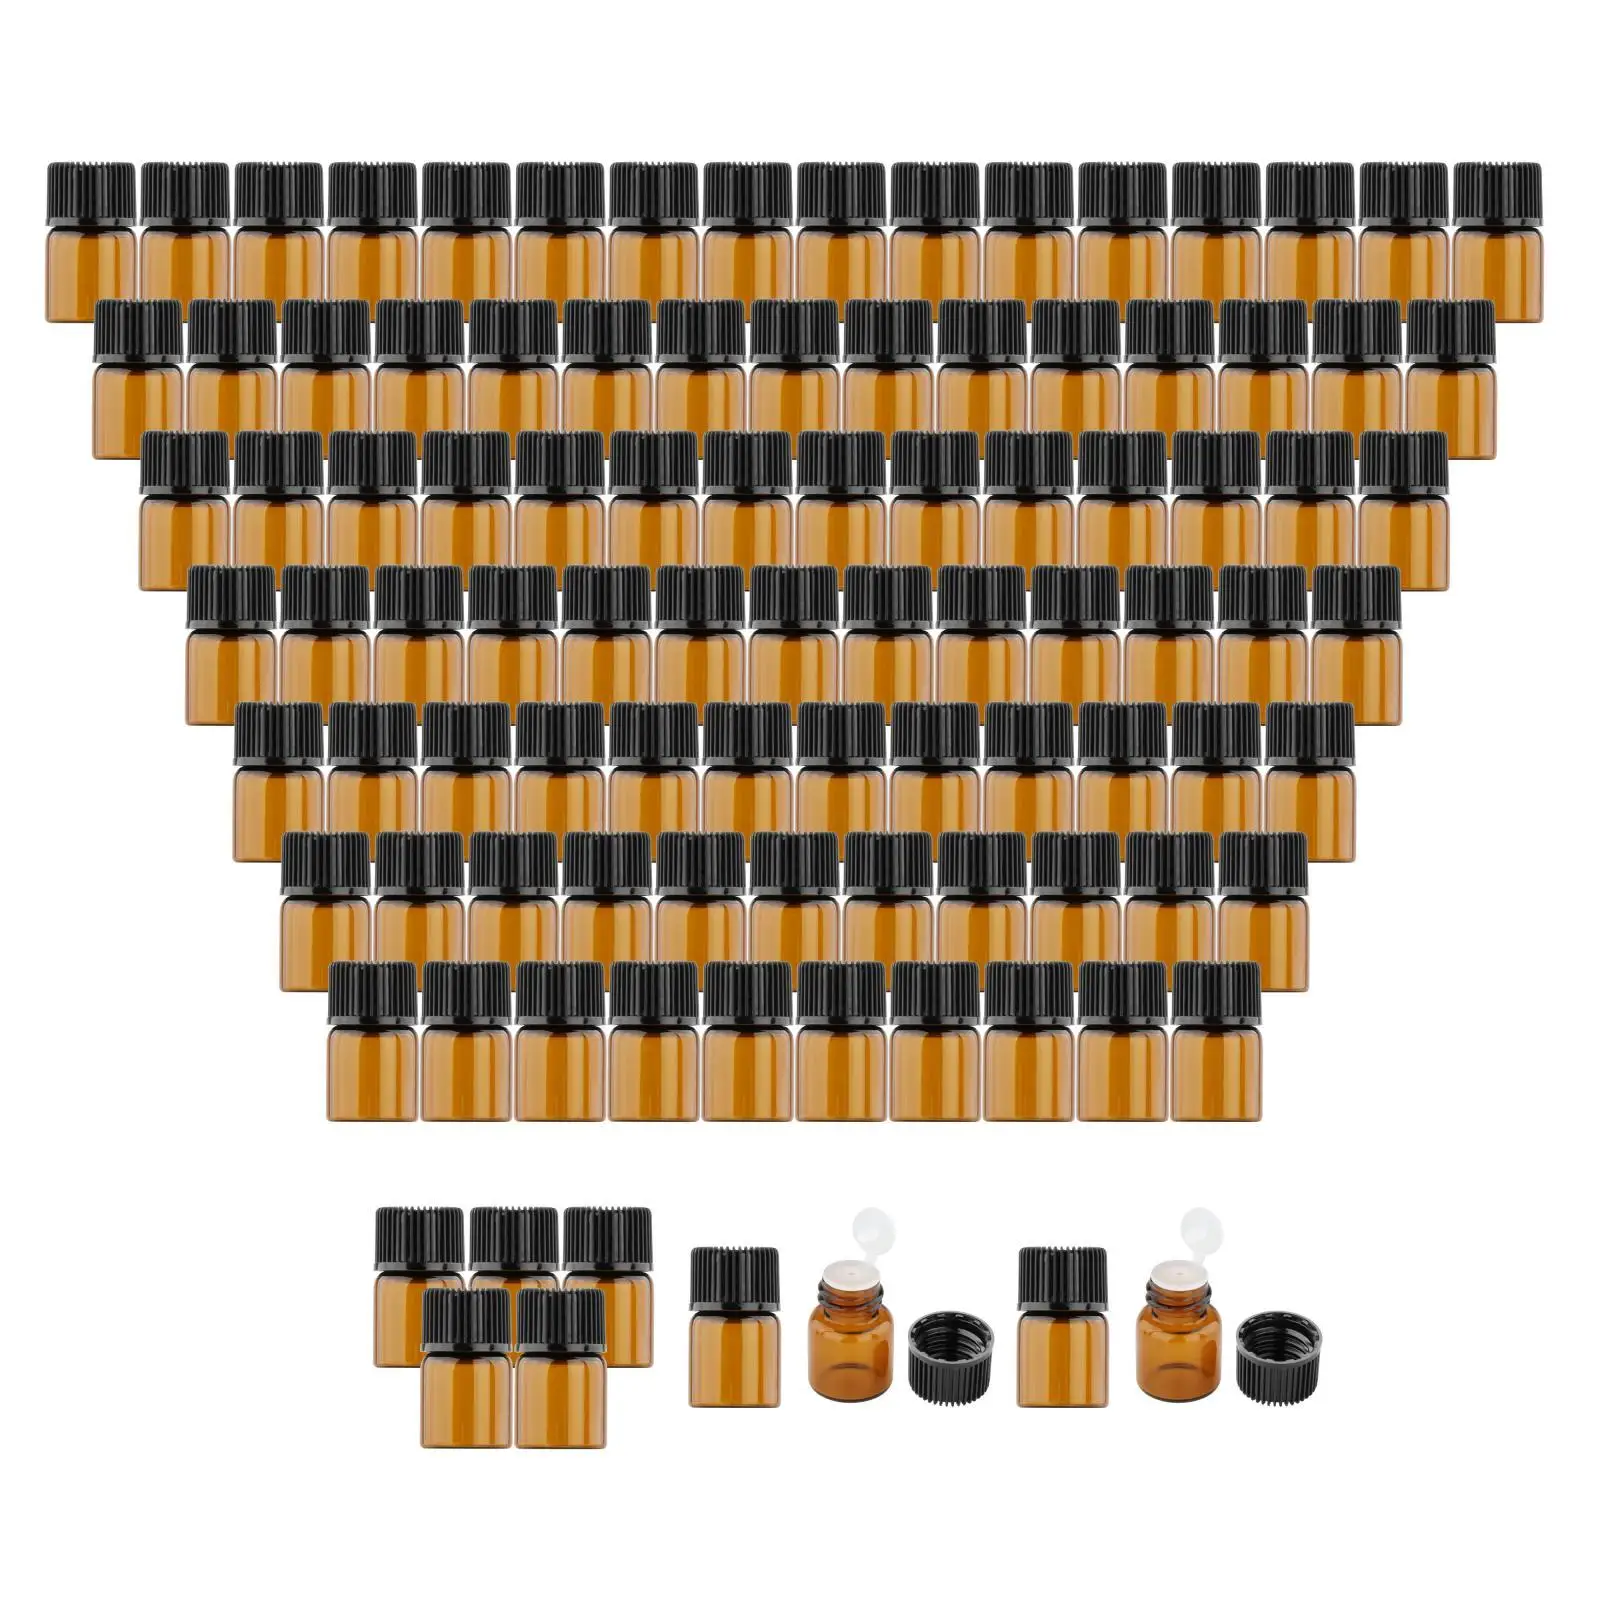 100 Pieces Amber Mini Glass Bottle Refillable for Perfume Chemical Liquid